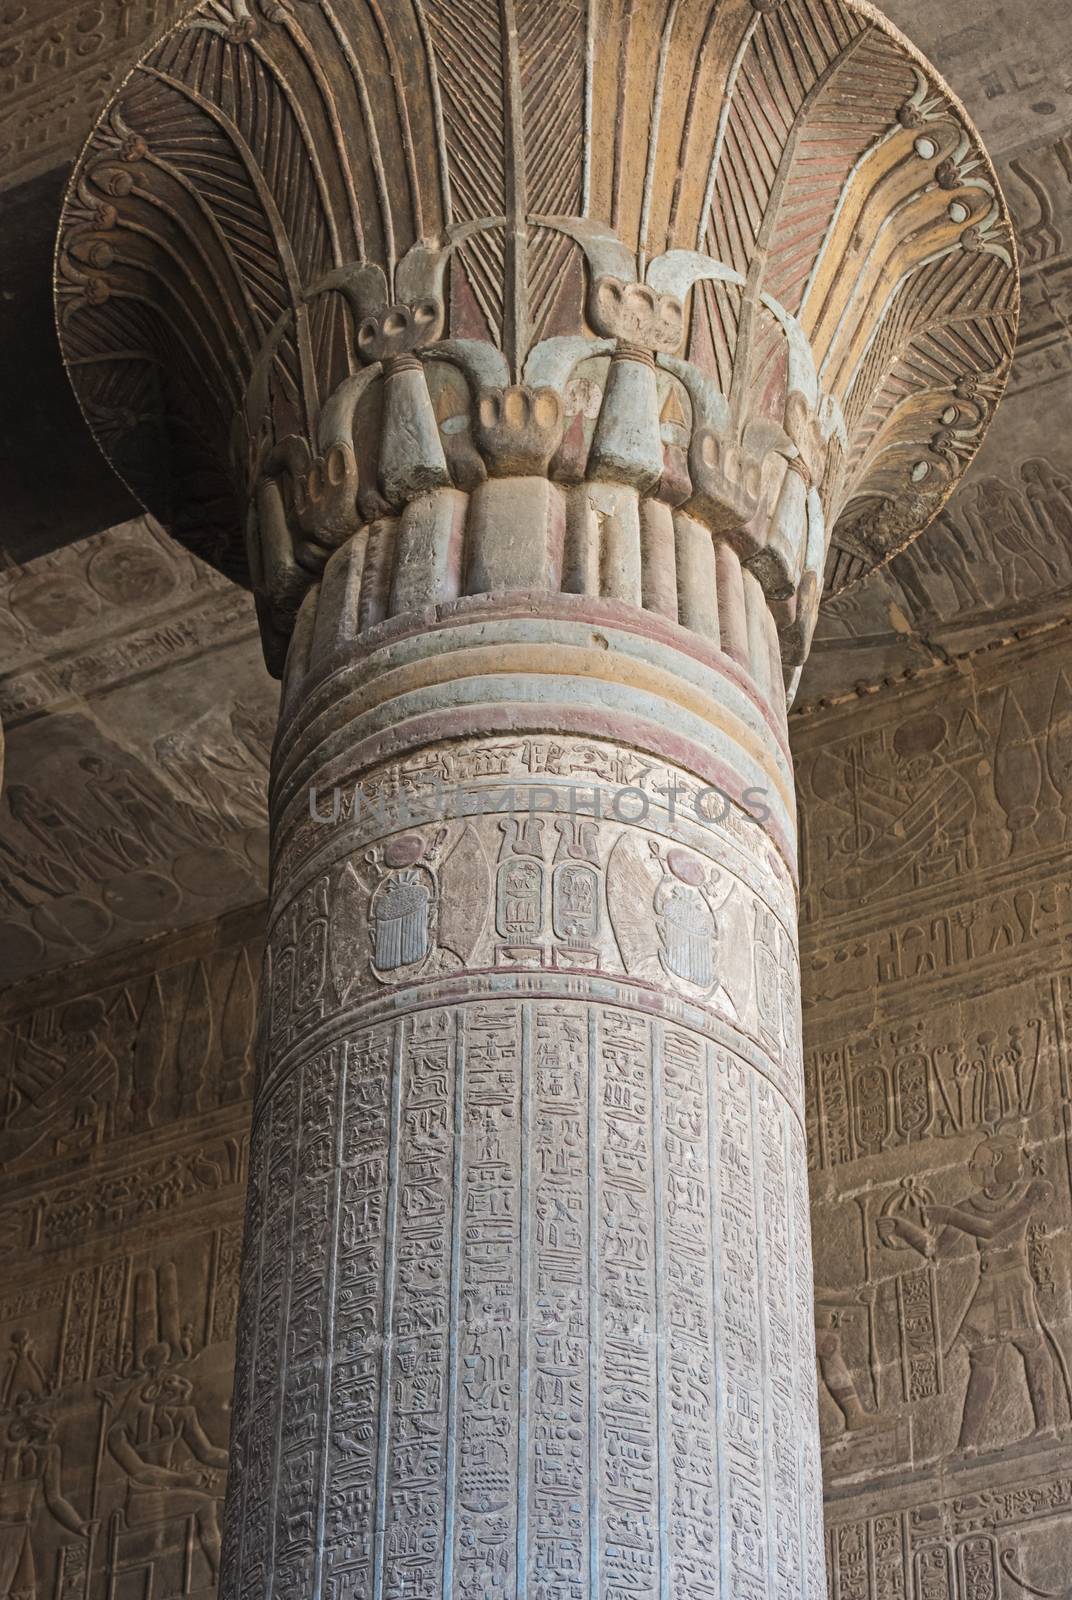 Column in the ancient egyptian temple of Khnum at Esna with hieroglyphic carvings